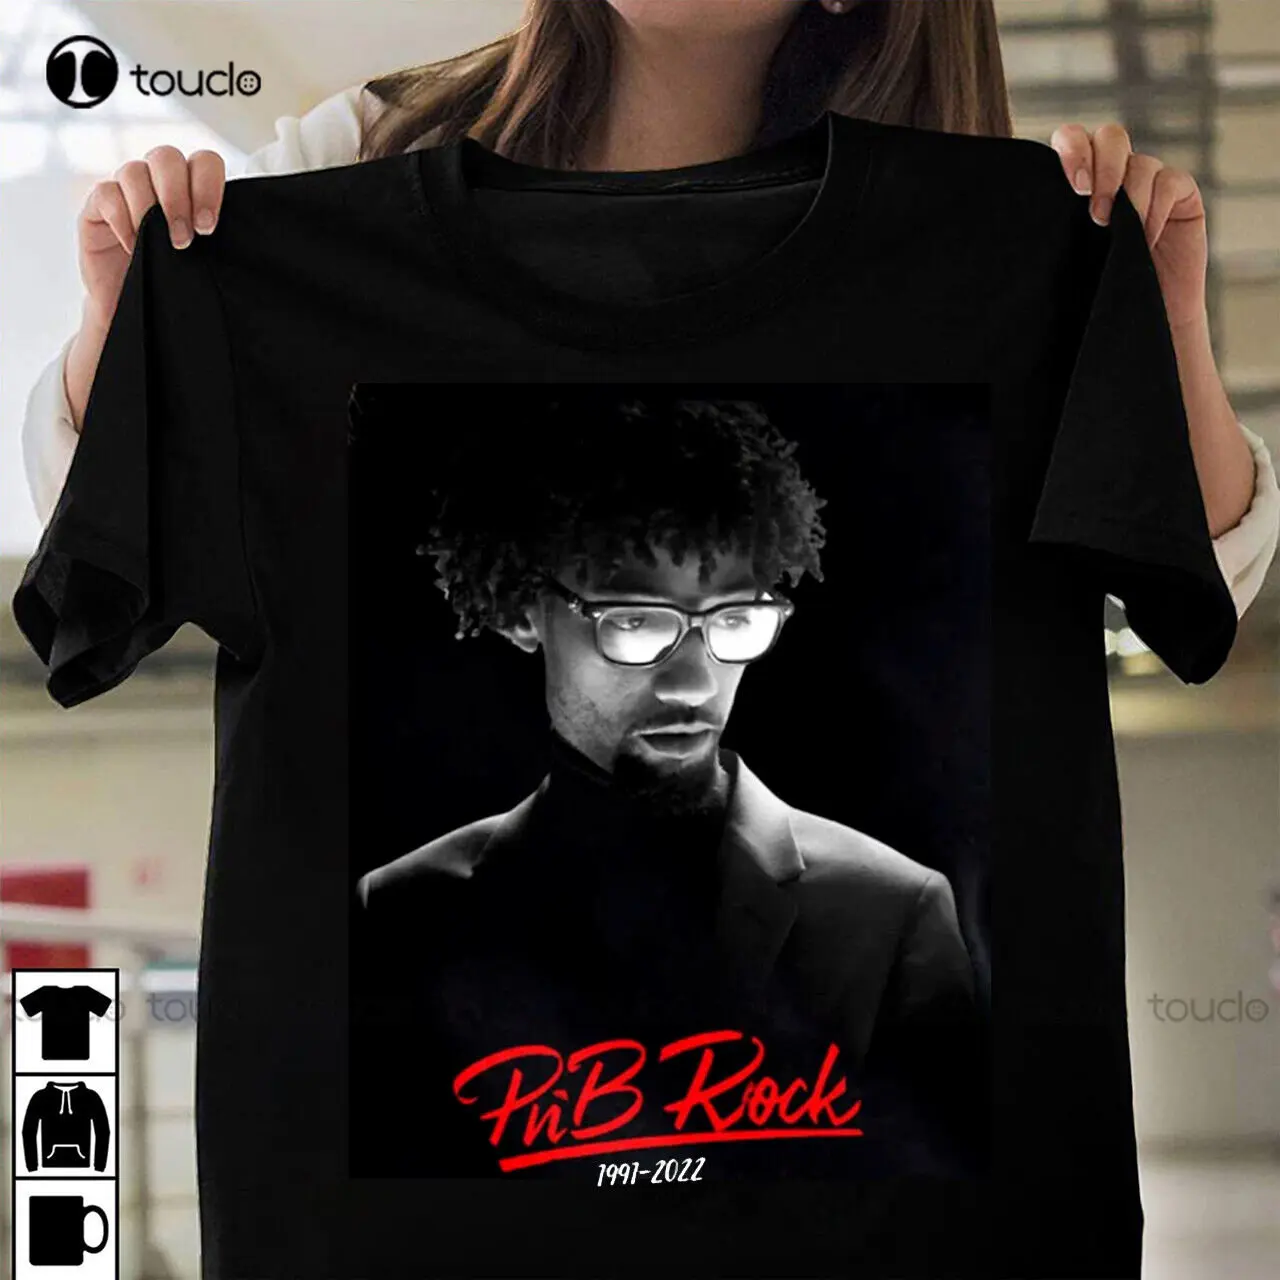 

Rip Pnb Rock 1991-2022 Unisex T-Shirt S-5Xl Rest In Peace Rapper Thank You New! Golf Shirts For Men Commemorative Tee Shirt